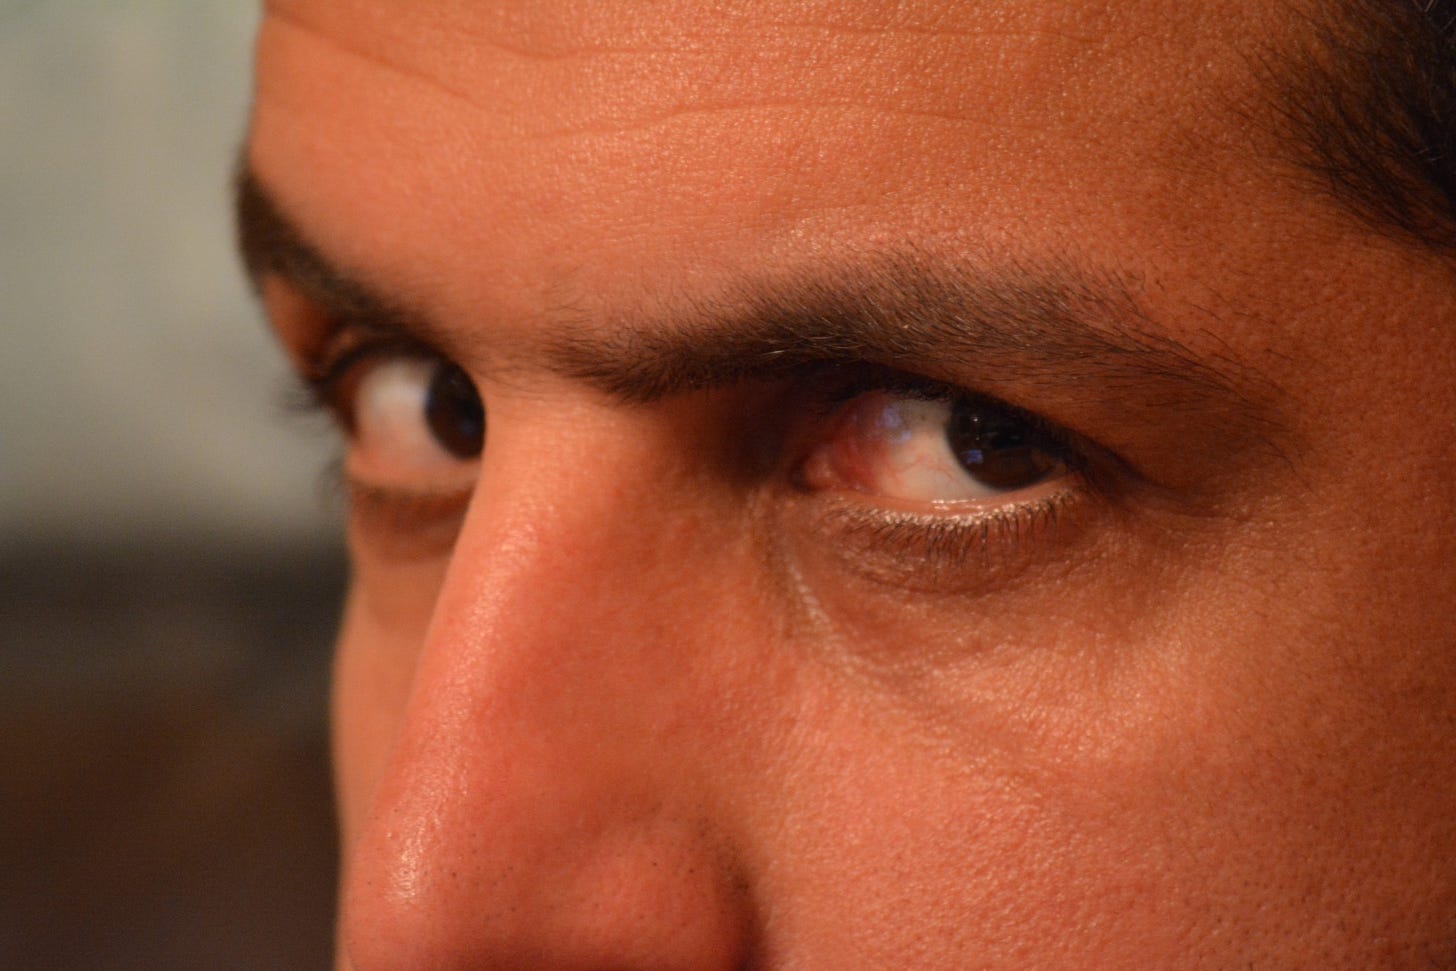 A man’s angry eyes stare closely into the camera.